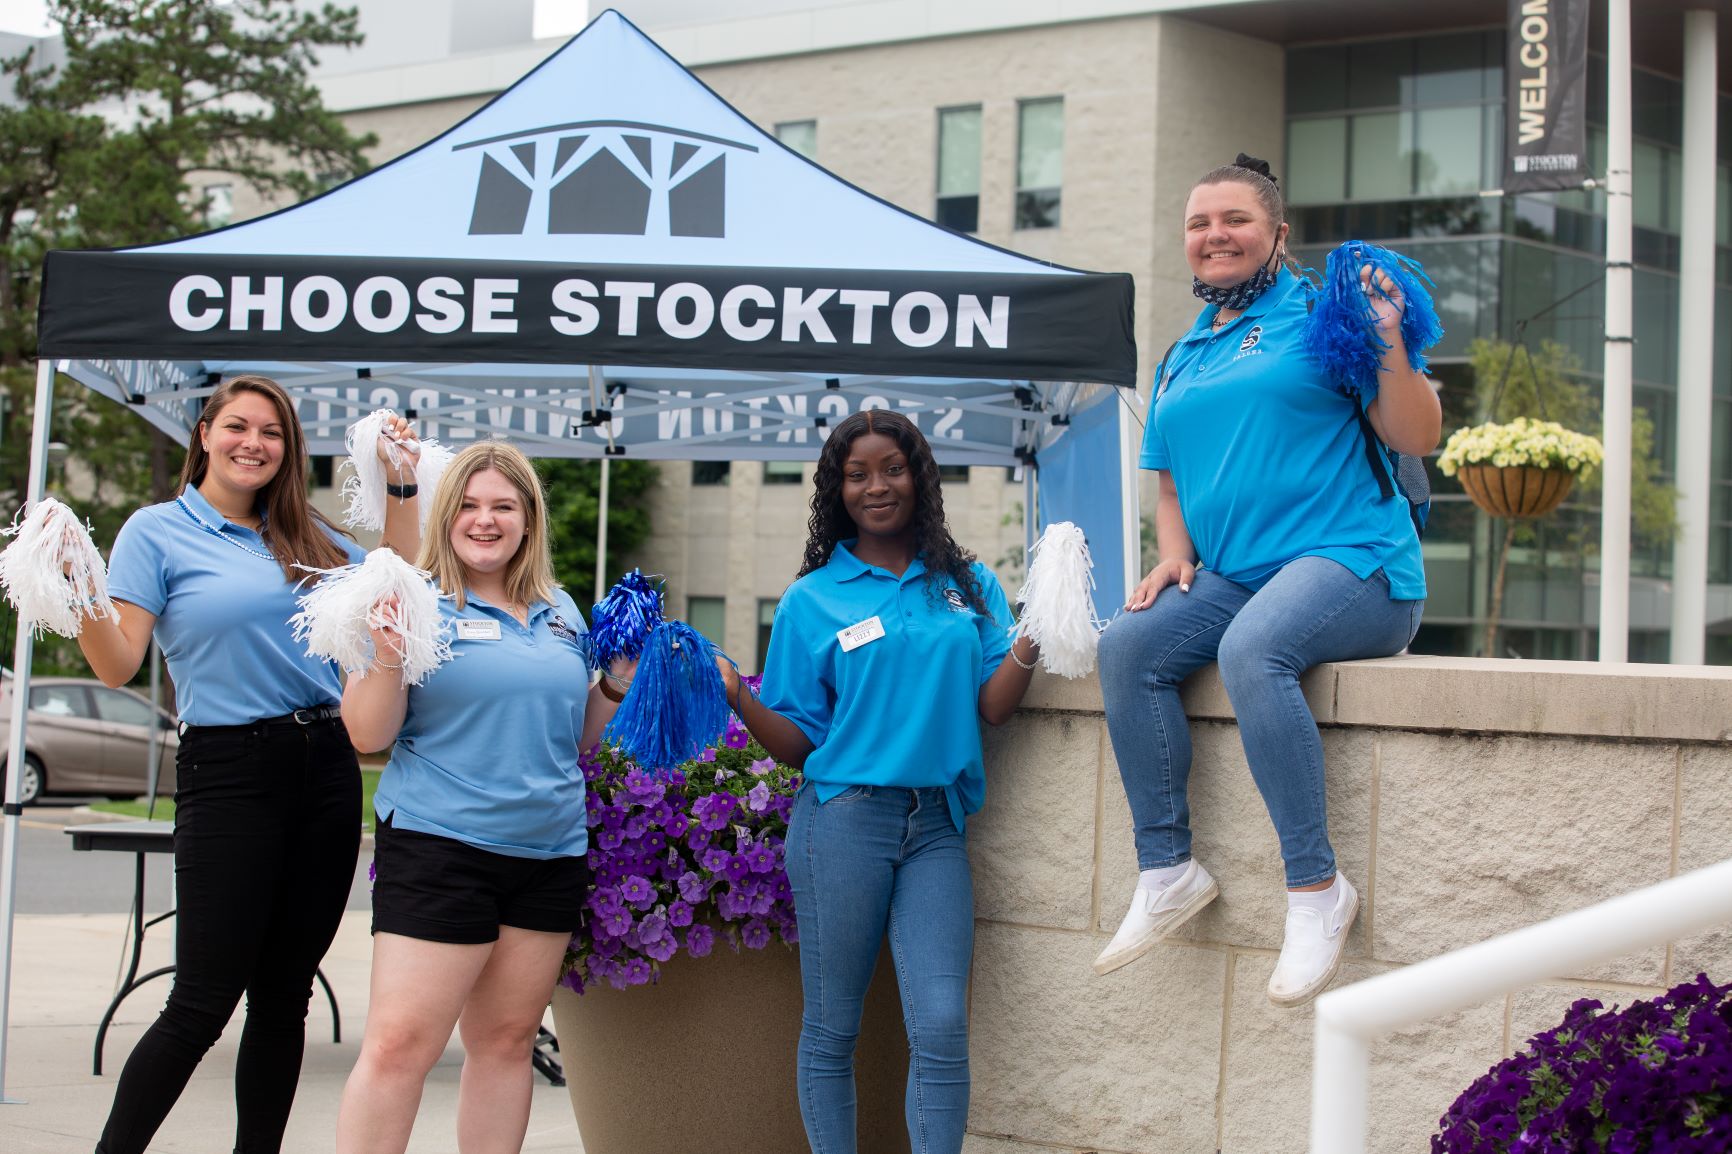 Stockton Admissions Ambassadors and T.A.L.O.N.S. greeted new students as they arrived on campus for Nest Fest, helping them feel right at home the moment they step foot on campus.